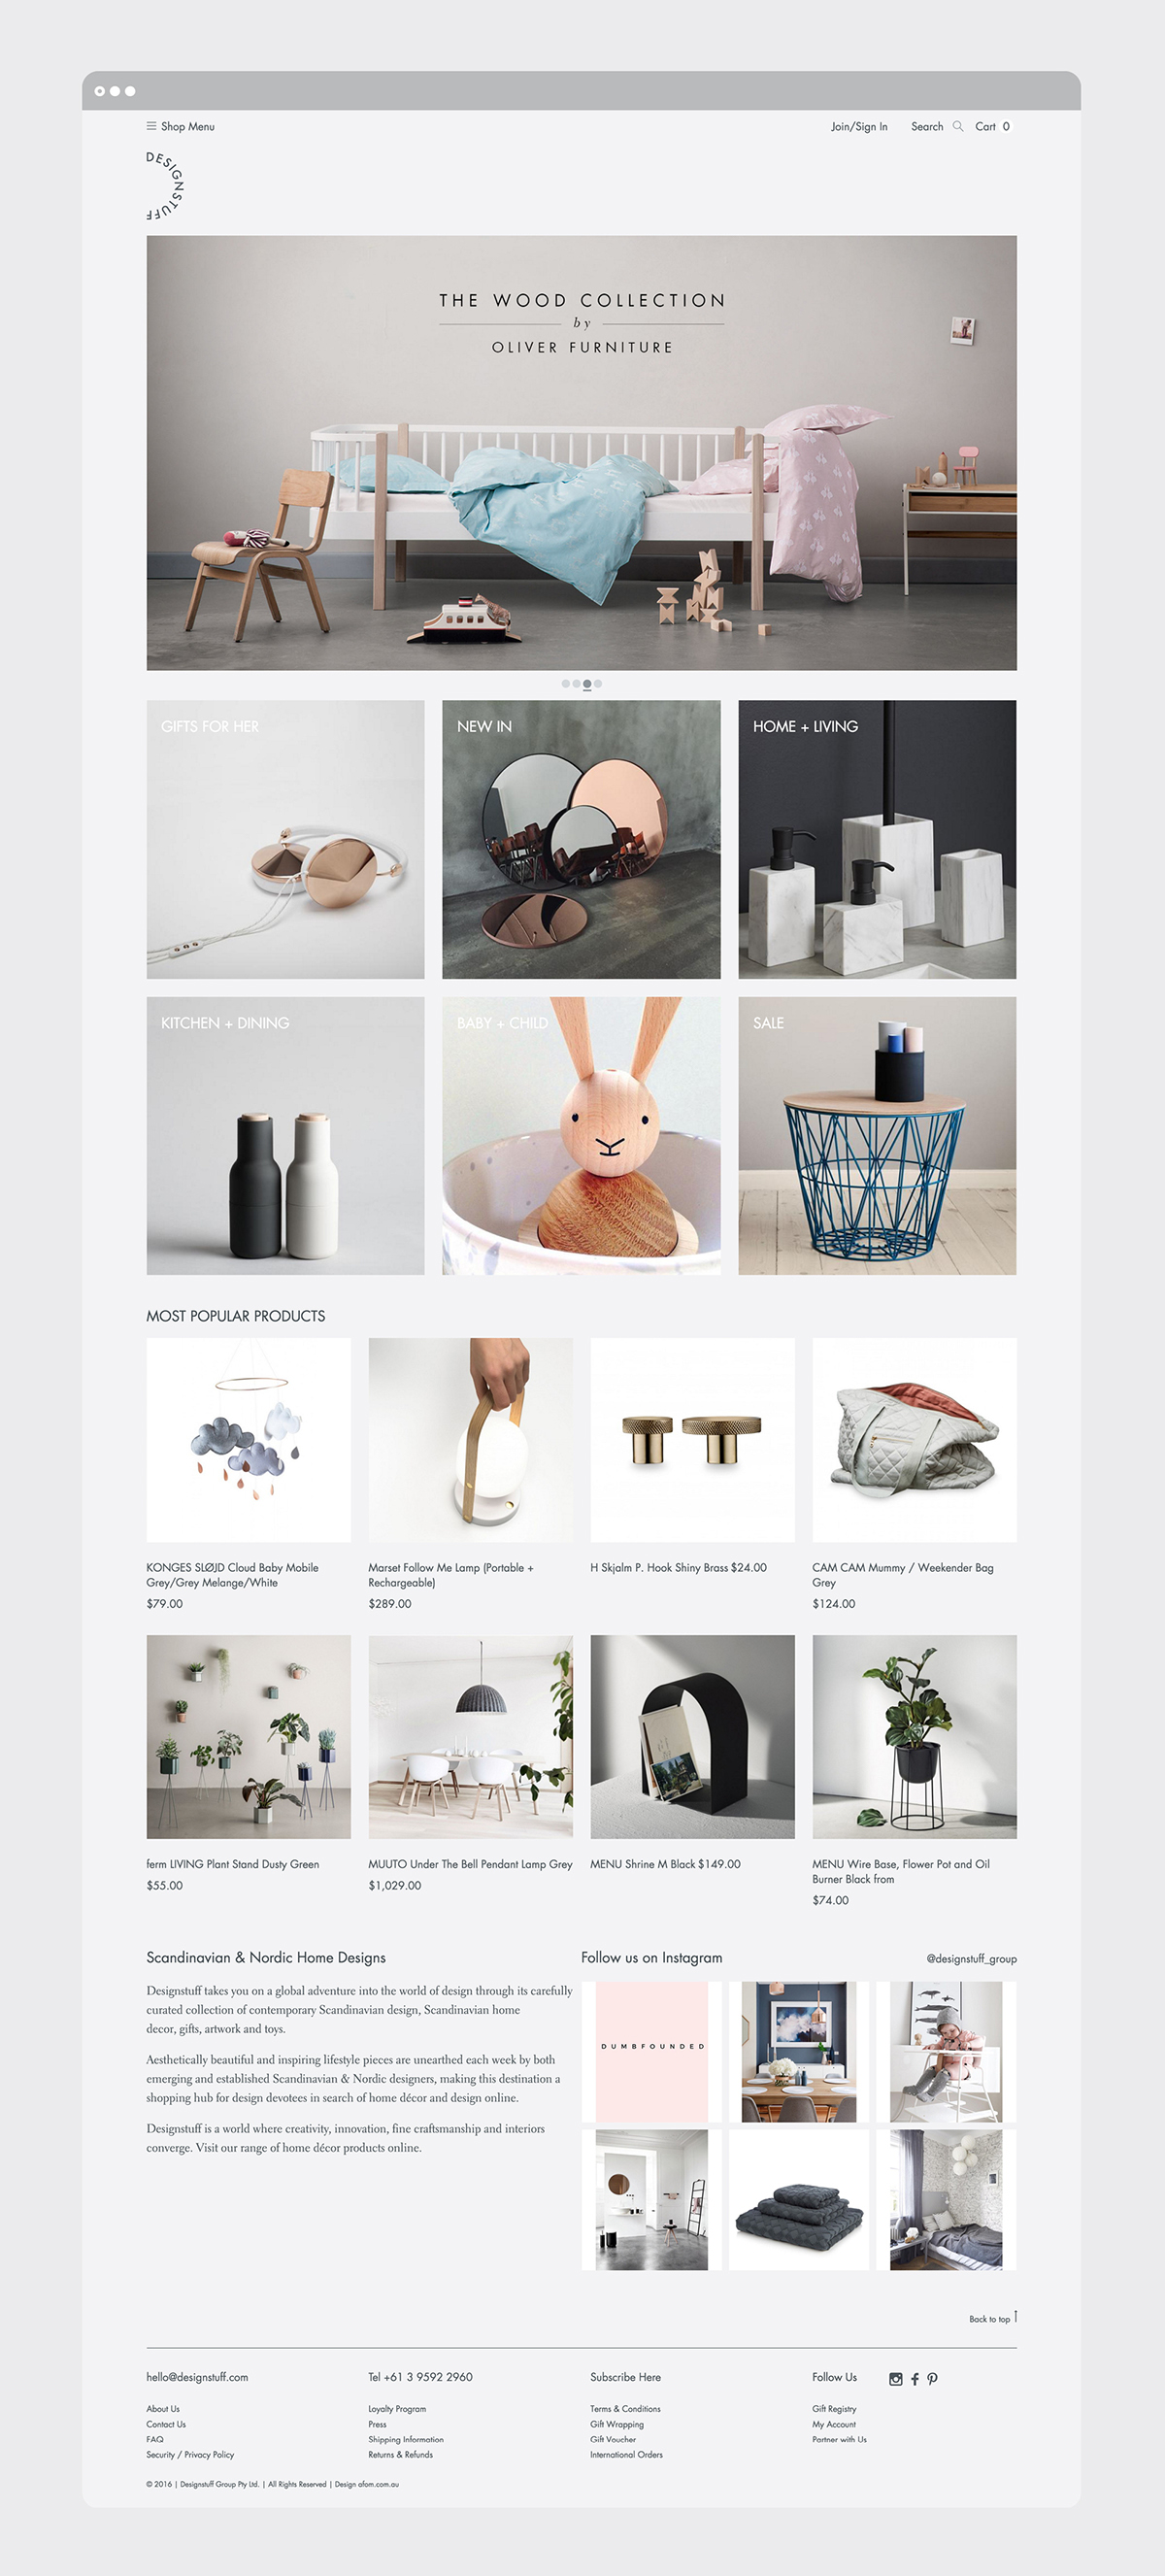 online store e-commerce Online shop homewares gifts danish brand guide drop down menu catalog page Hoverstate brush Mobile responsive product loading icon logo